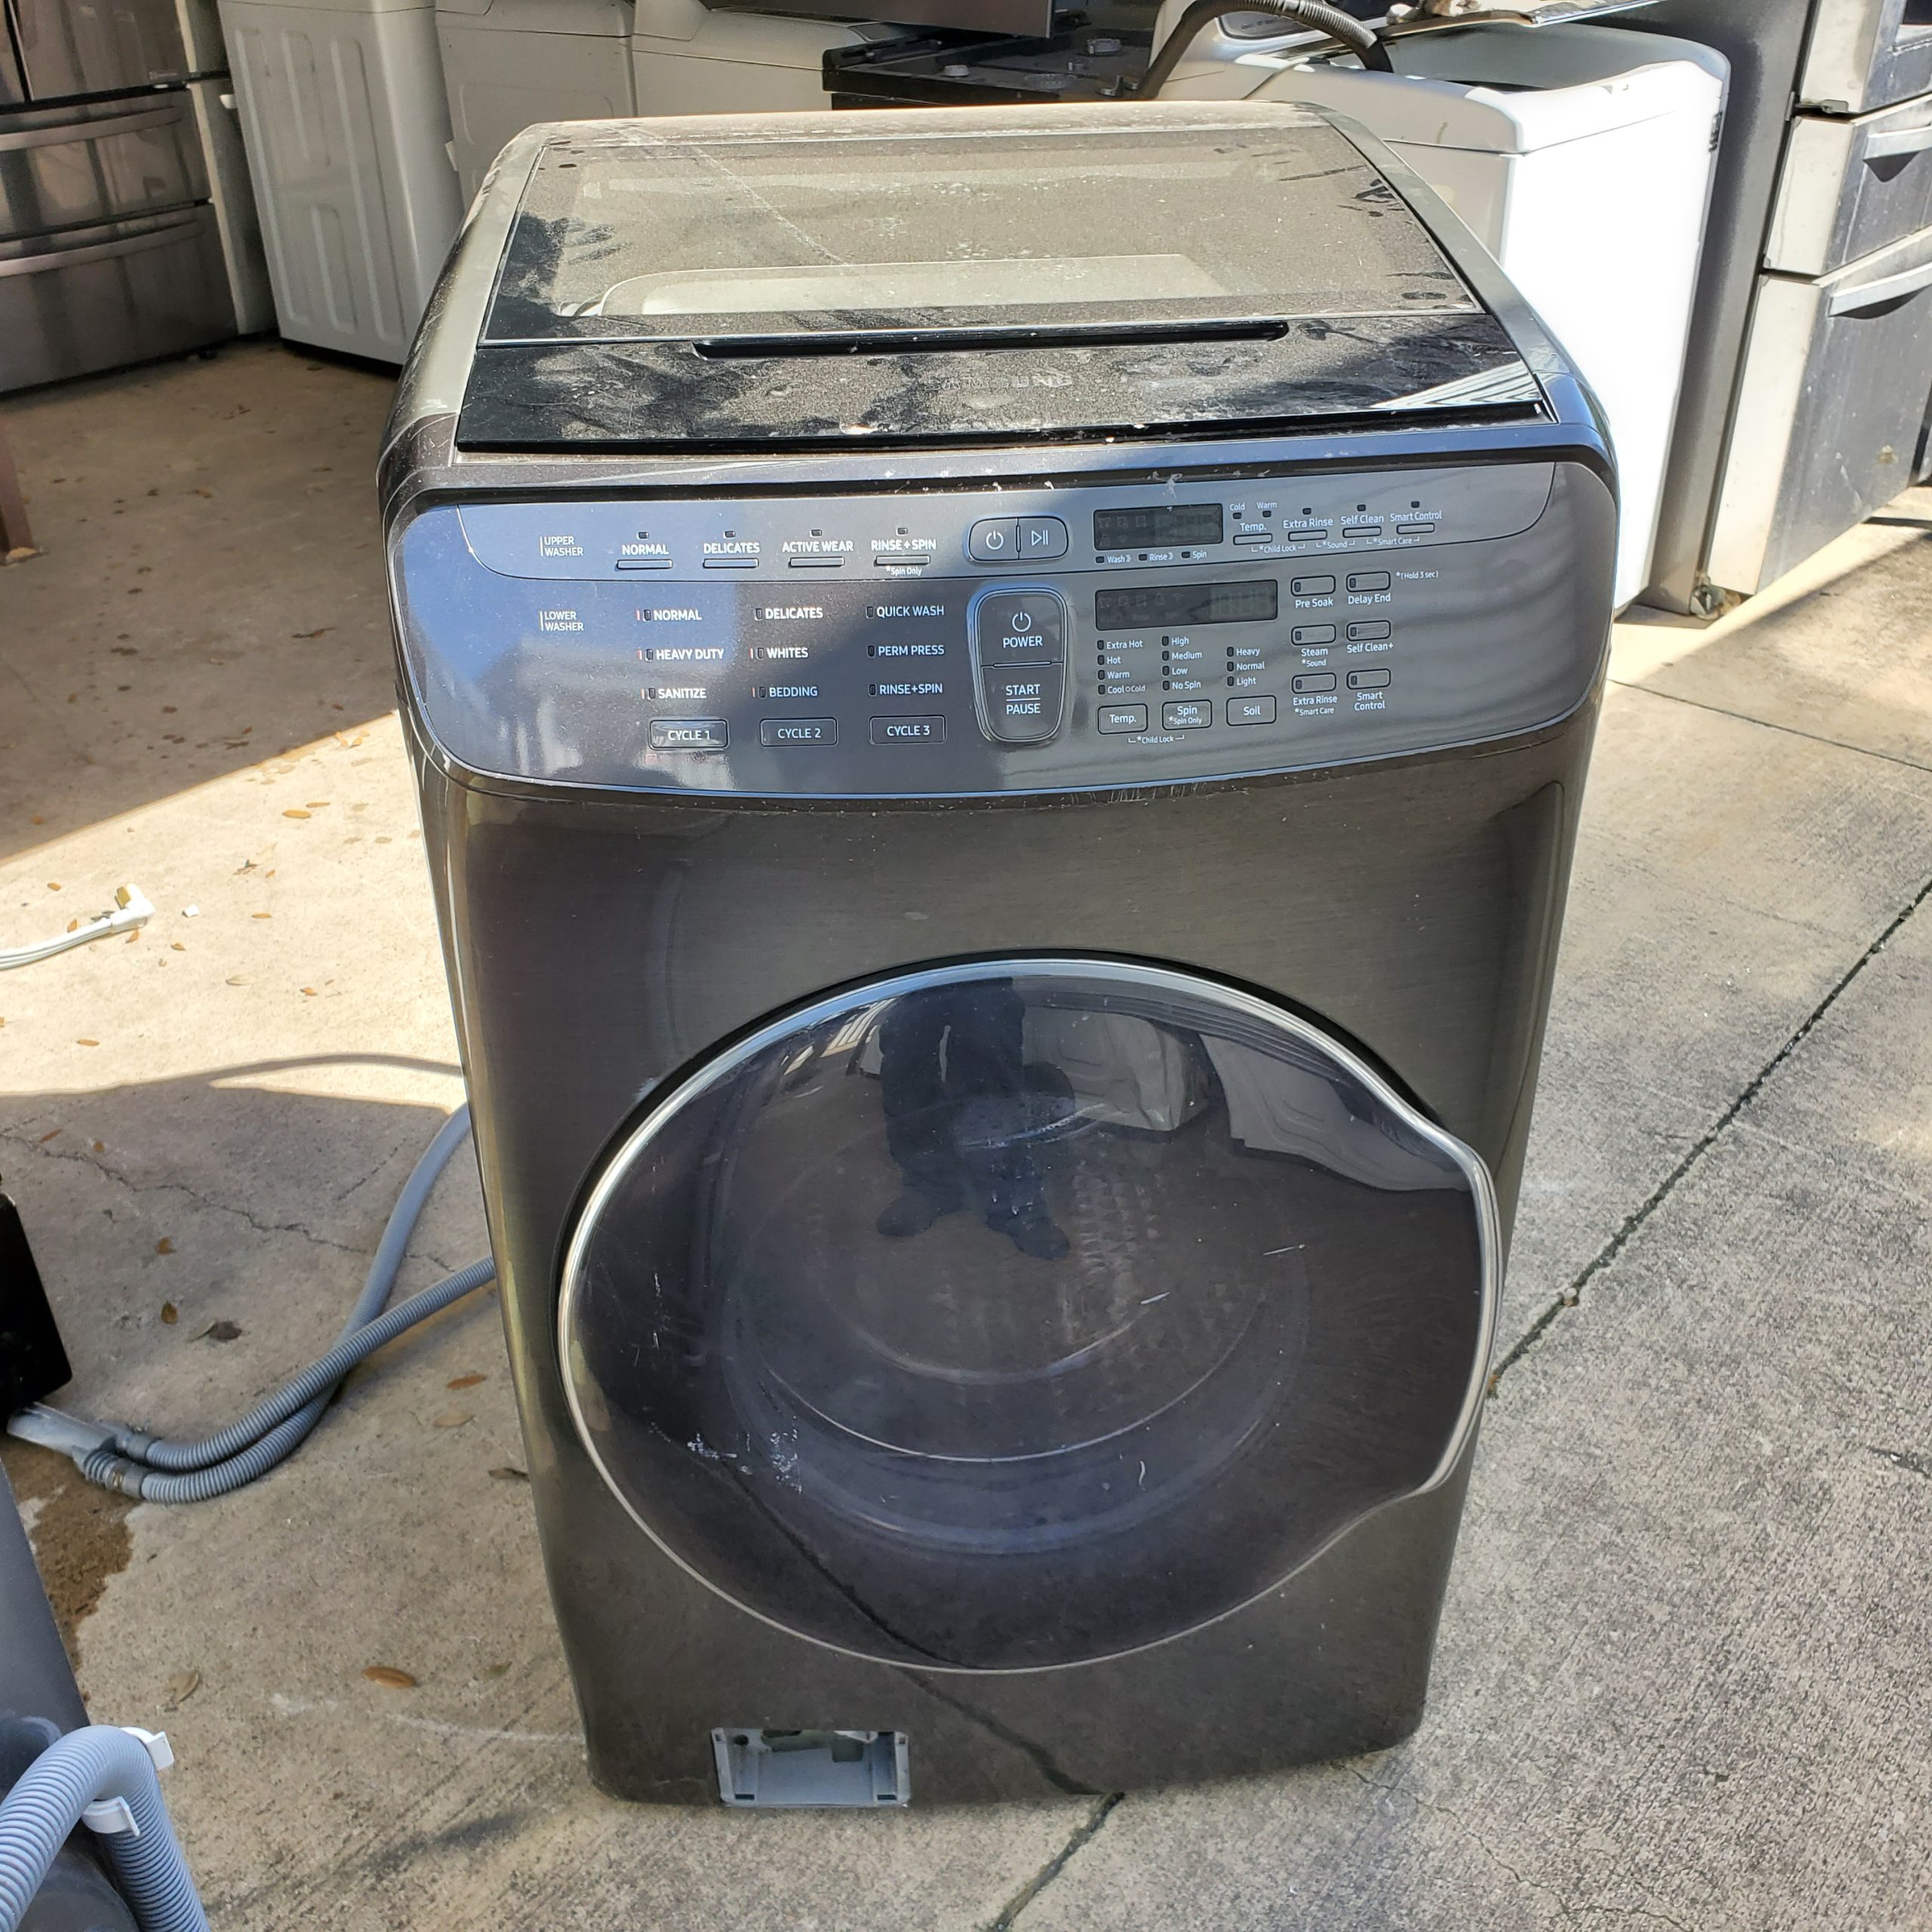 example pictures of Another High end Front load Samsung Washing Machine from our Salvage appliance program.